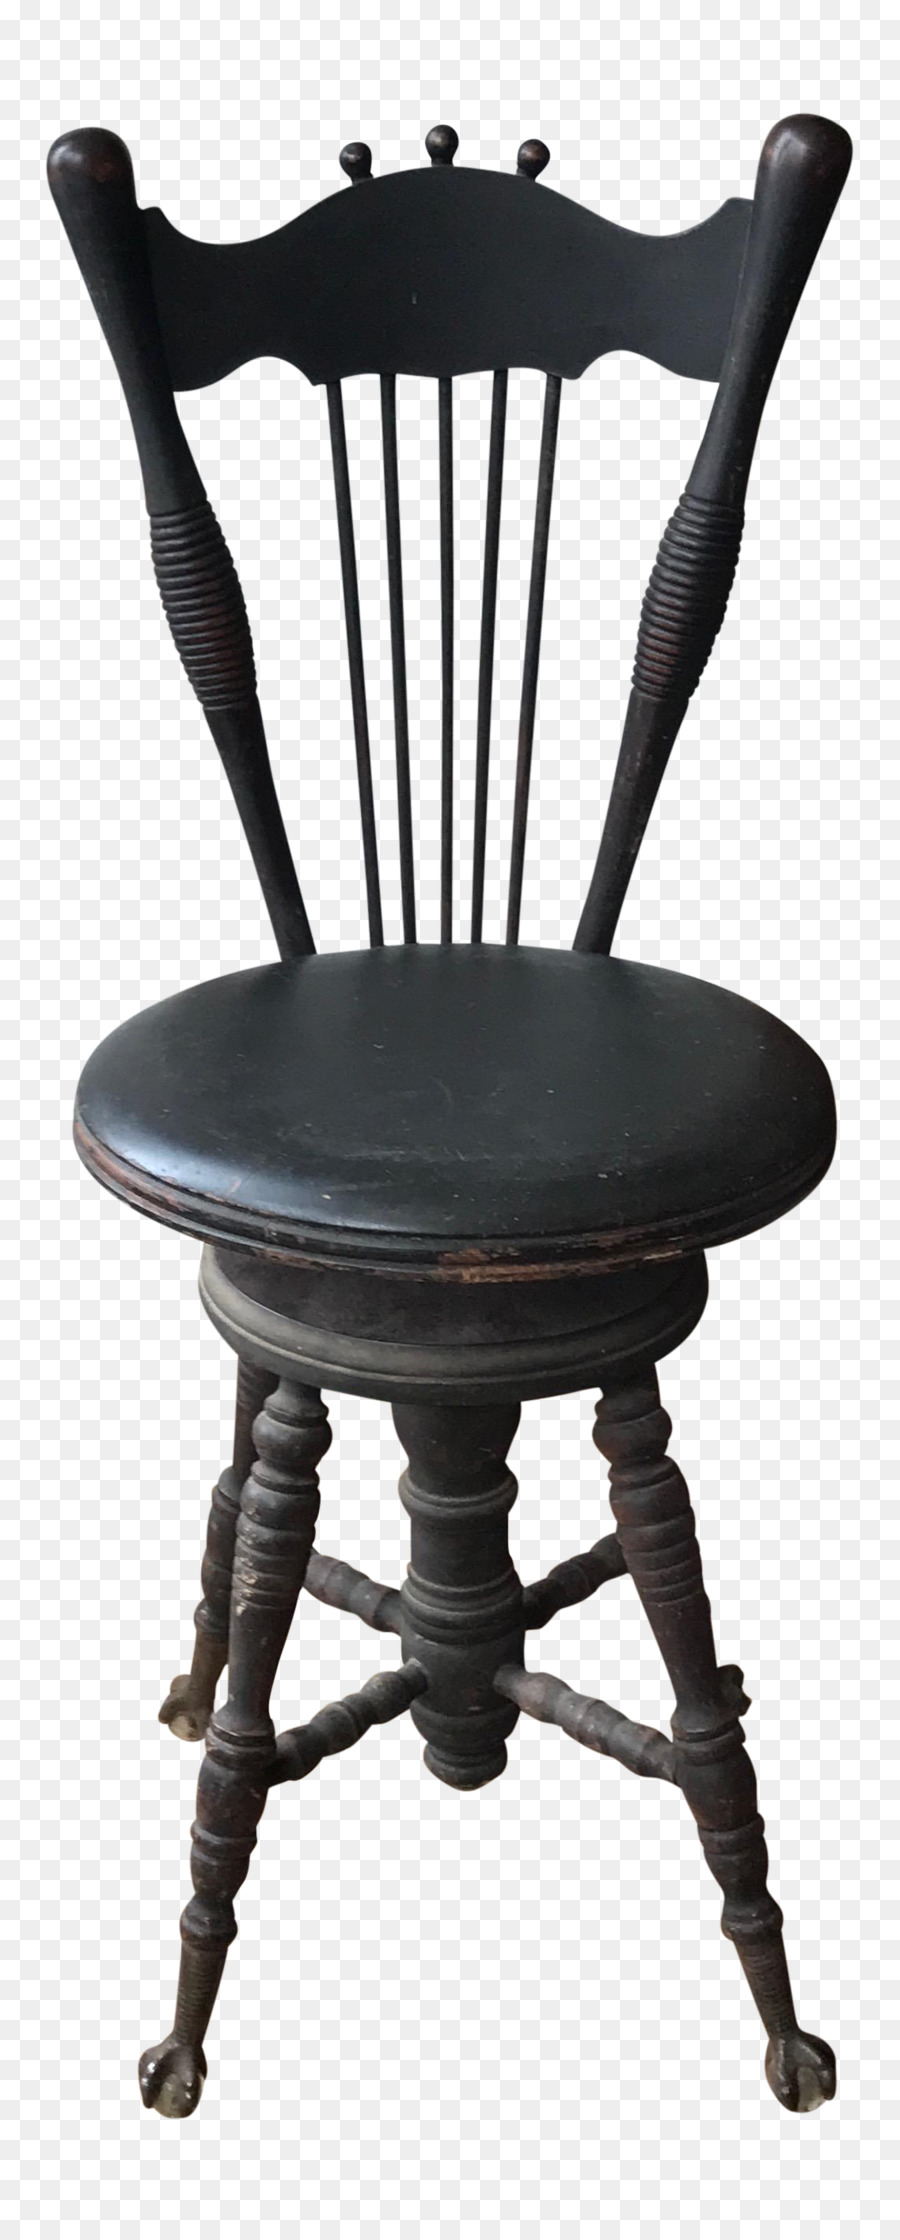 Furniture Chair Stool Png Download 1137 2820 Free